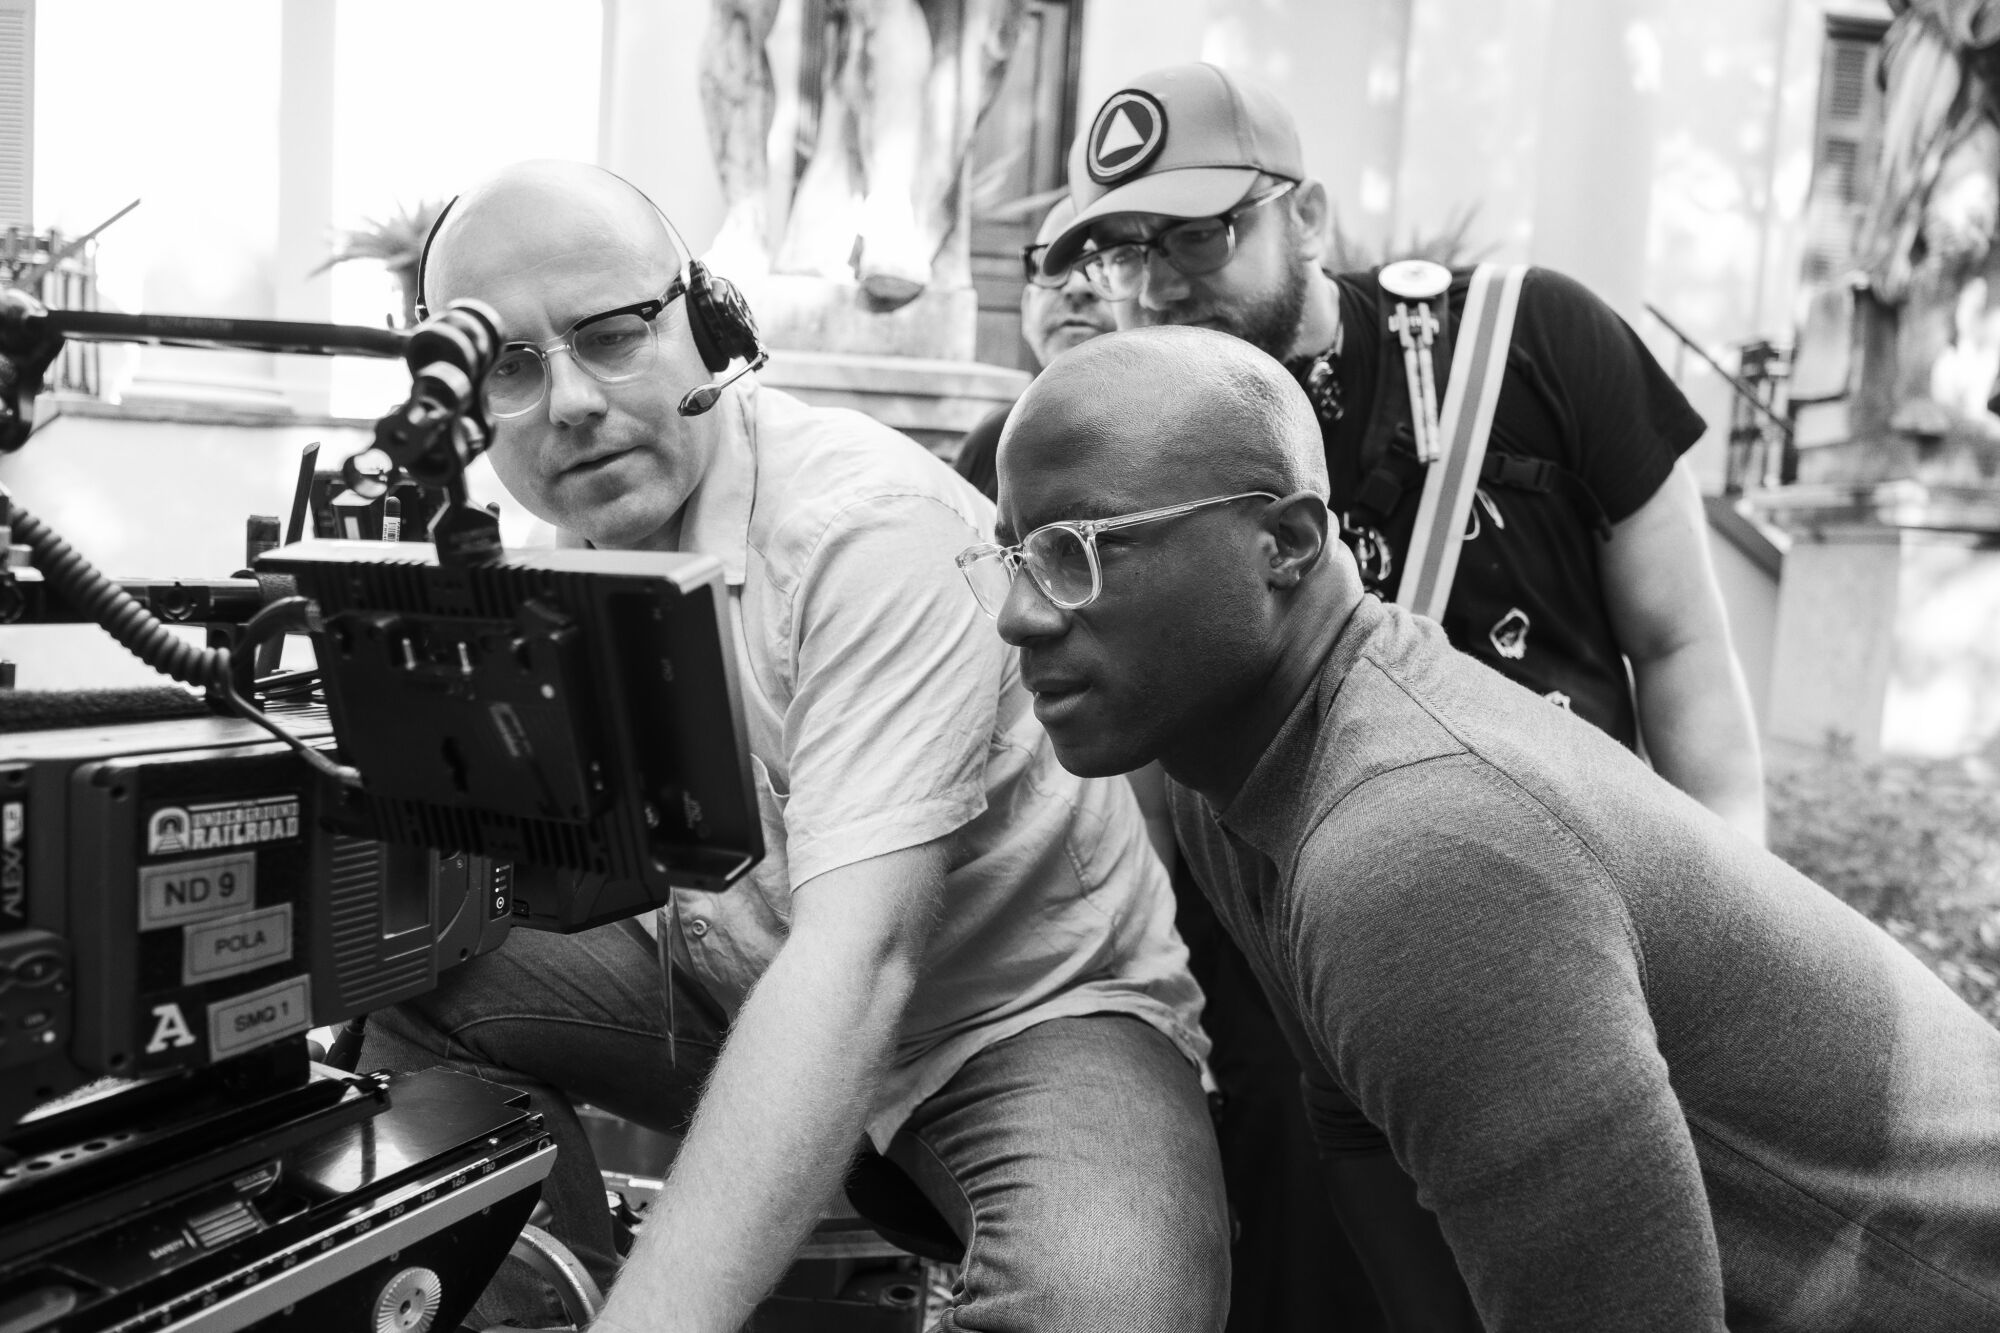 Cinematographer James Paxton and director Barry Jenkins look through the camera while filming "The Underground Railroad."